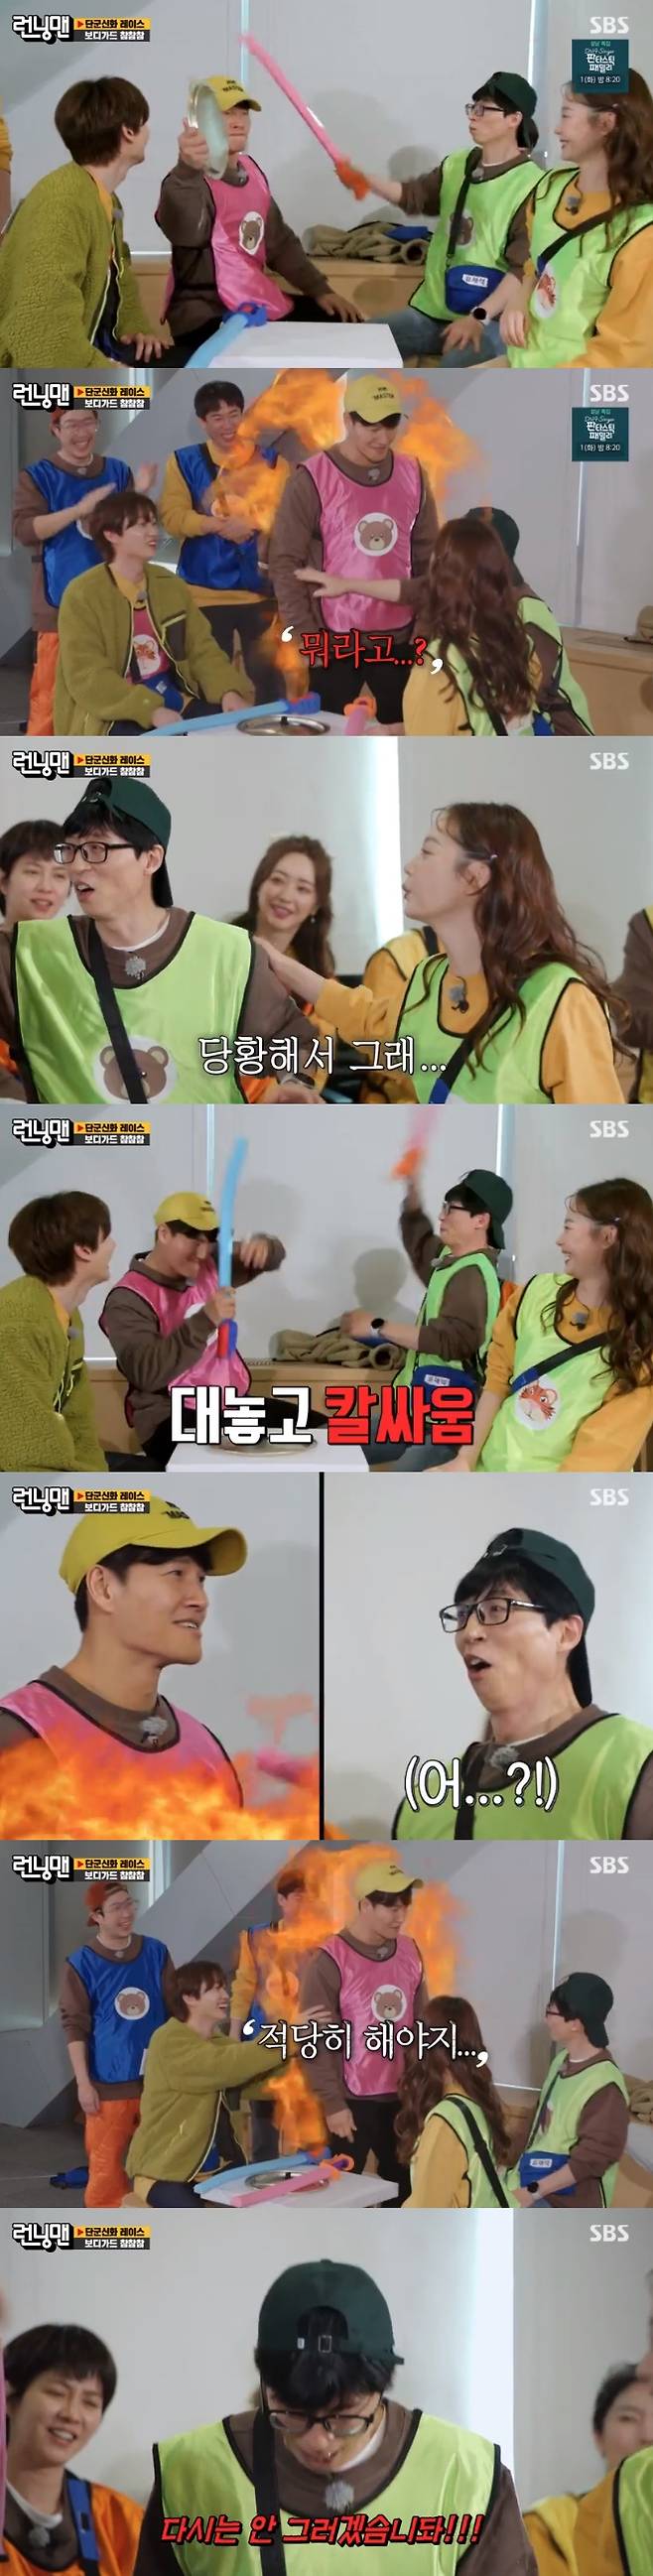 In Running Man, Yoo Jae-Suk and Kim Jong-kook caused laughter by the fight of middle-aged children.On the afternoon of the 30th, SBS entertainment program Running Man was held at The Bodyguard.Kim Jong-kook was the Eunhyuks and Yoo Jae-Suk was the Jeon So-mins The Bodyguard and picked up the toy knife.If the attack is successful, you can swing the knife instead.At this time, Yoo Jae-Suk caused a smile by swinging a knife at Kim Jong-kook, not Eunhyuk, when Jeon So-min succeeded in attacking the true.Yoo Jae-Suk said, I was embarrassed and I did it. Kim Jong-kook grinded his teeth with a sigh of anger, If it is this, it will be like this.But Yoo Jae-Suk also swung a toy knife at Kim Jong-kook in the next edition, this time hitting Kim Jong-kook with a heart-warming thrashing.Kim Jong-kook got up and said, Lets do it properly. How many times do you panic? Yoo Jae-Suk apologized, saying, Im sorry, Im out of my mind.